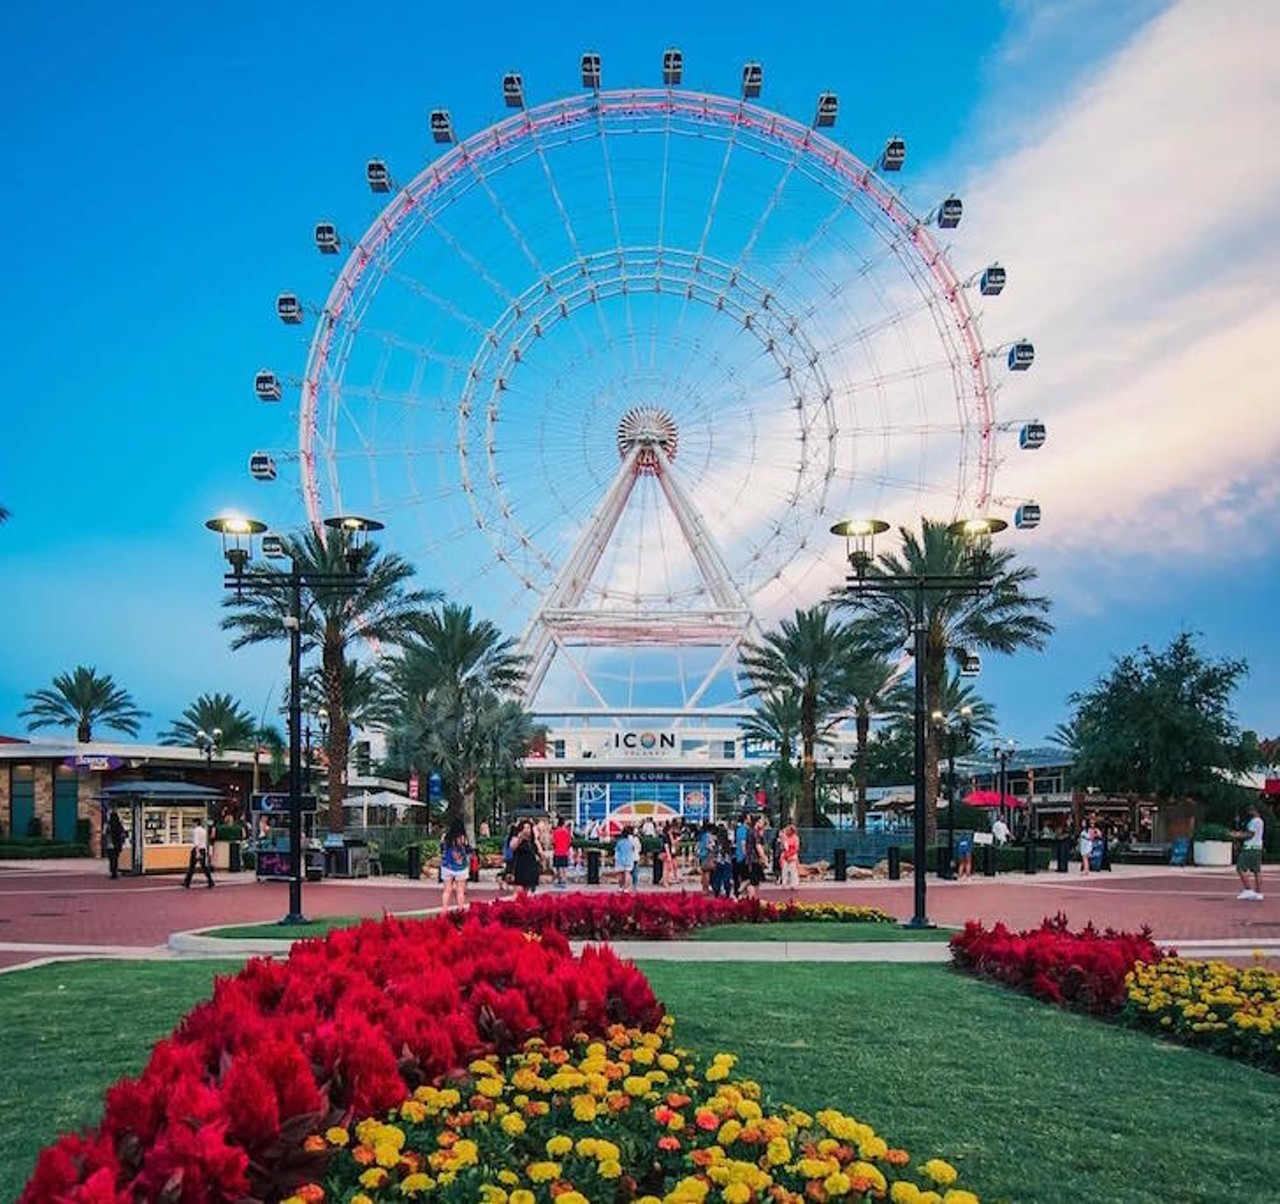 ICON Park
8375 International Drive, 321-888-2690
Walk through the ocean tunnel at the Sea Life Aquarium or snap a selfie with your favorite celebs and historical figures at Madame Tussaud&#146;s wax museum. If you&#146;re up for some games and win for prizes, hit up Arcade City.
Photo via iconorlando360/Instagram